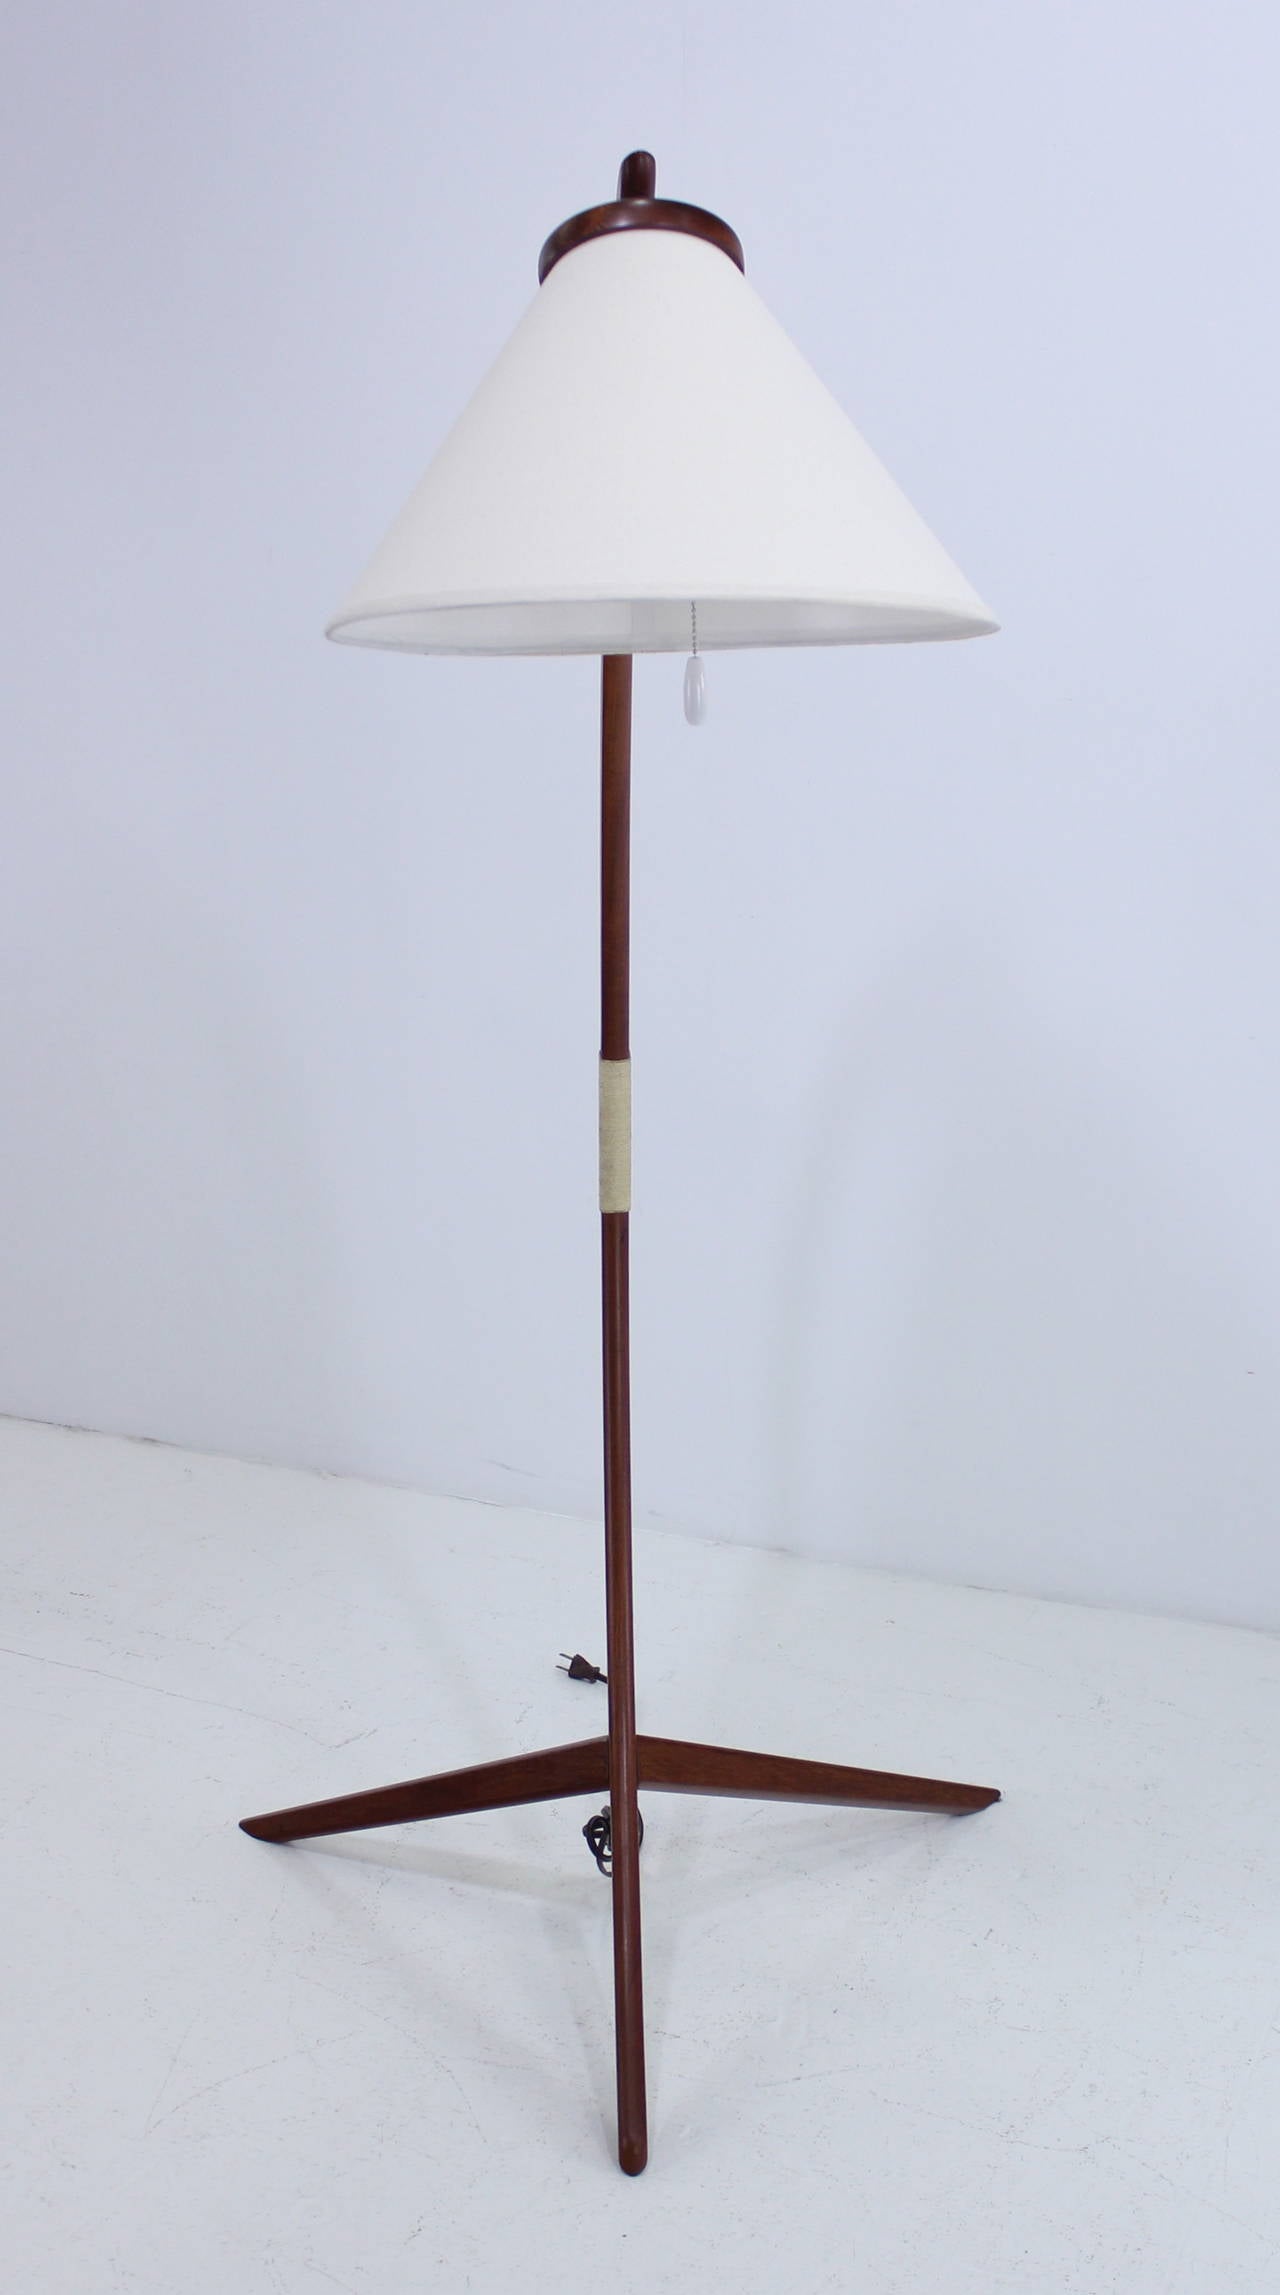 Danish Modern Arc Floor Lamp In Excellent Condition For Sale In Portland, OR